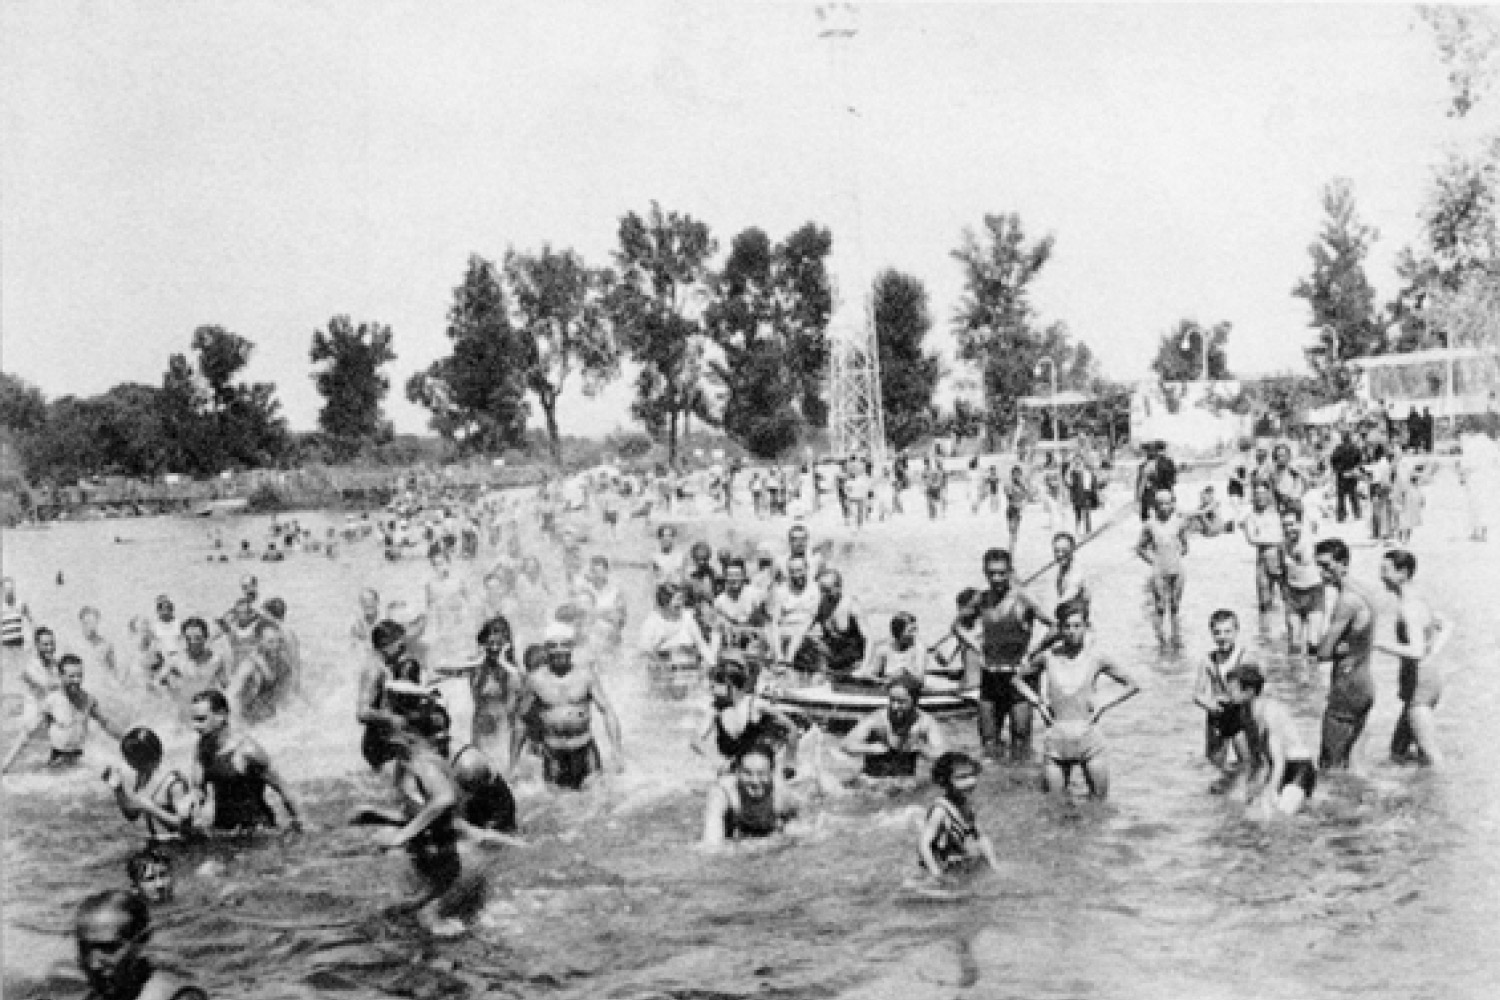 People bathing in a river in Madrid